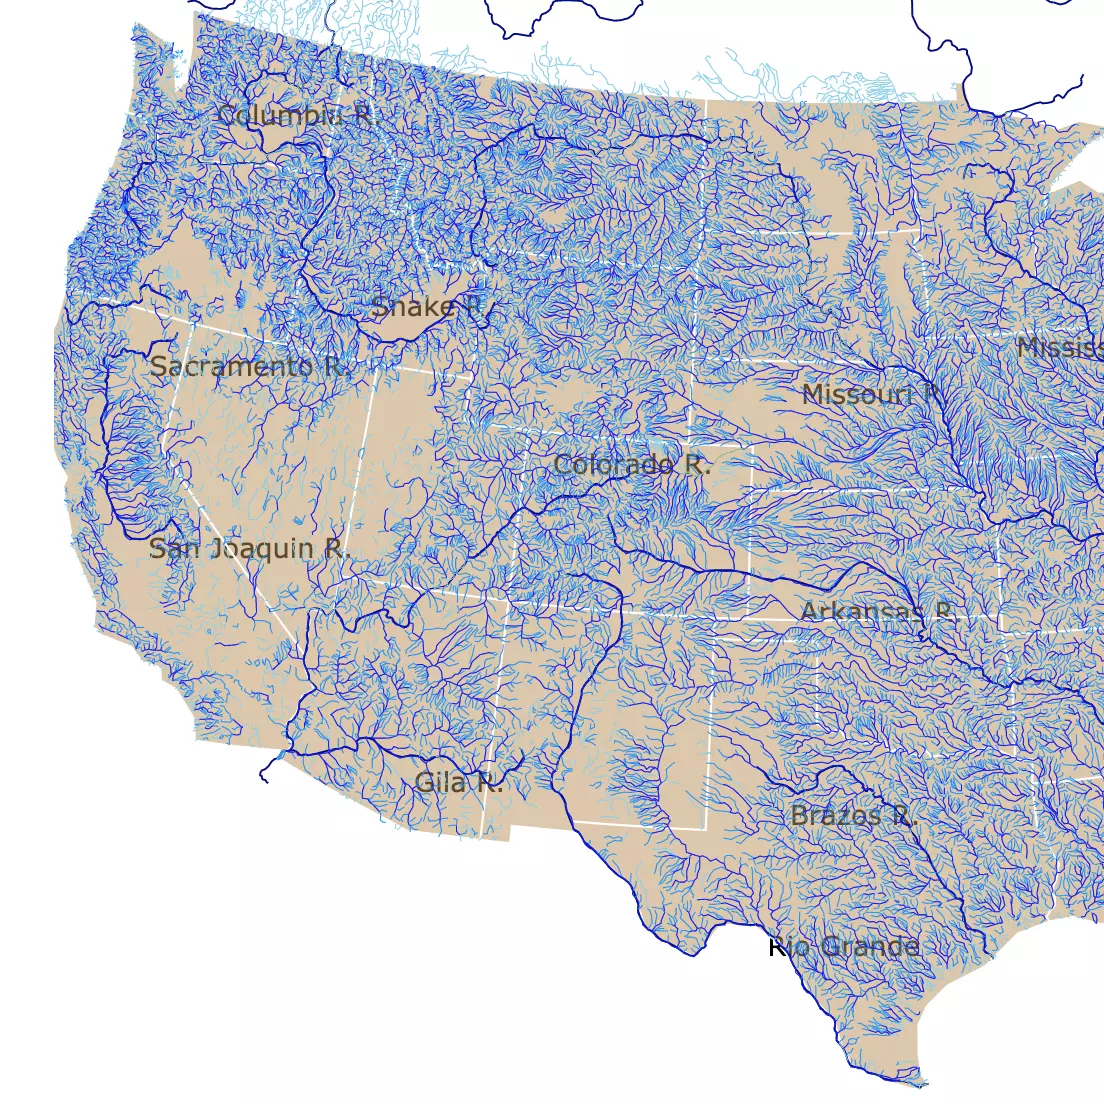 Rivers of the United States